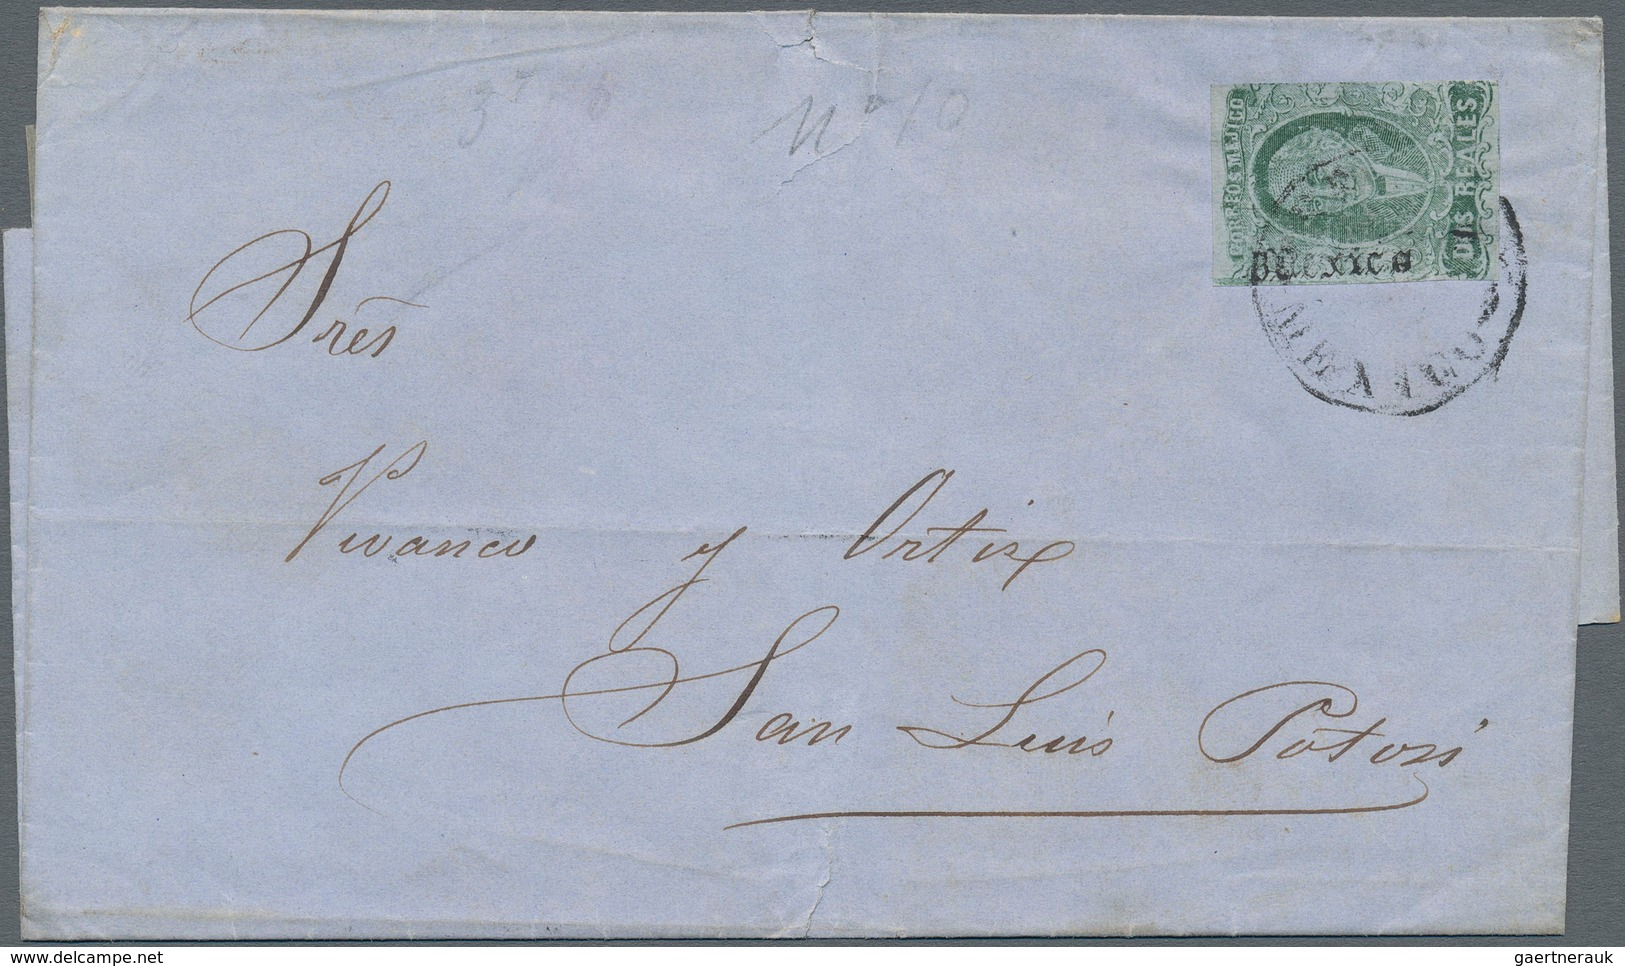 Mexiko: 1857/1868, HIDALGO with/without overprint, group of eight lettersheets with attractive frank